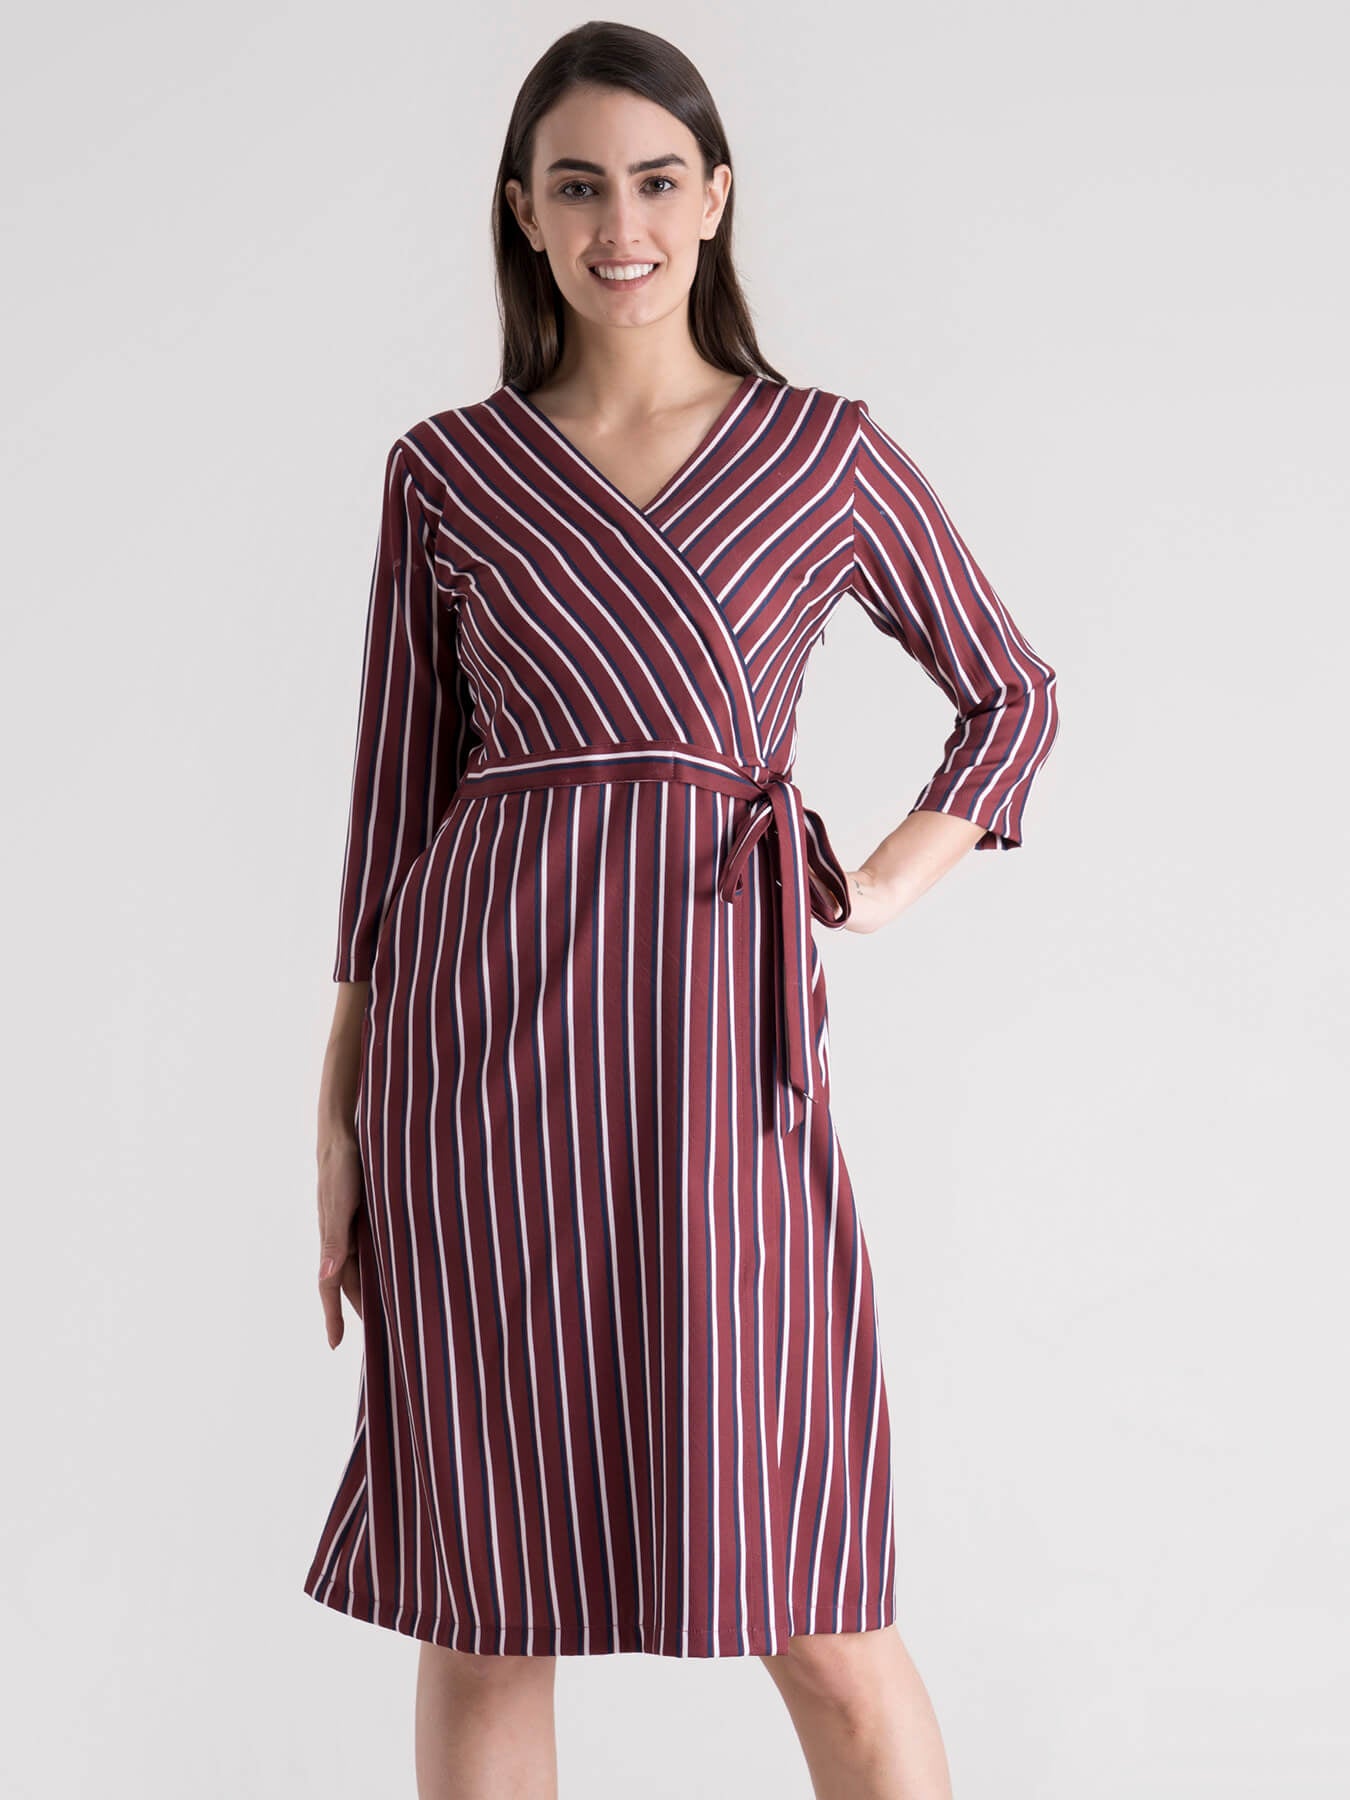 Striped Wrap Dress - Maroon and White